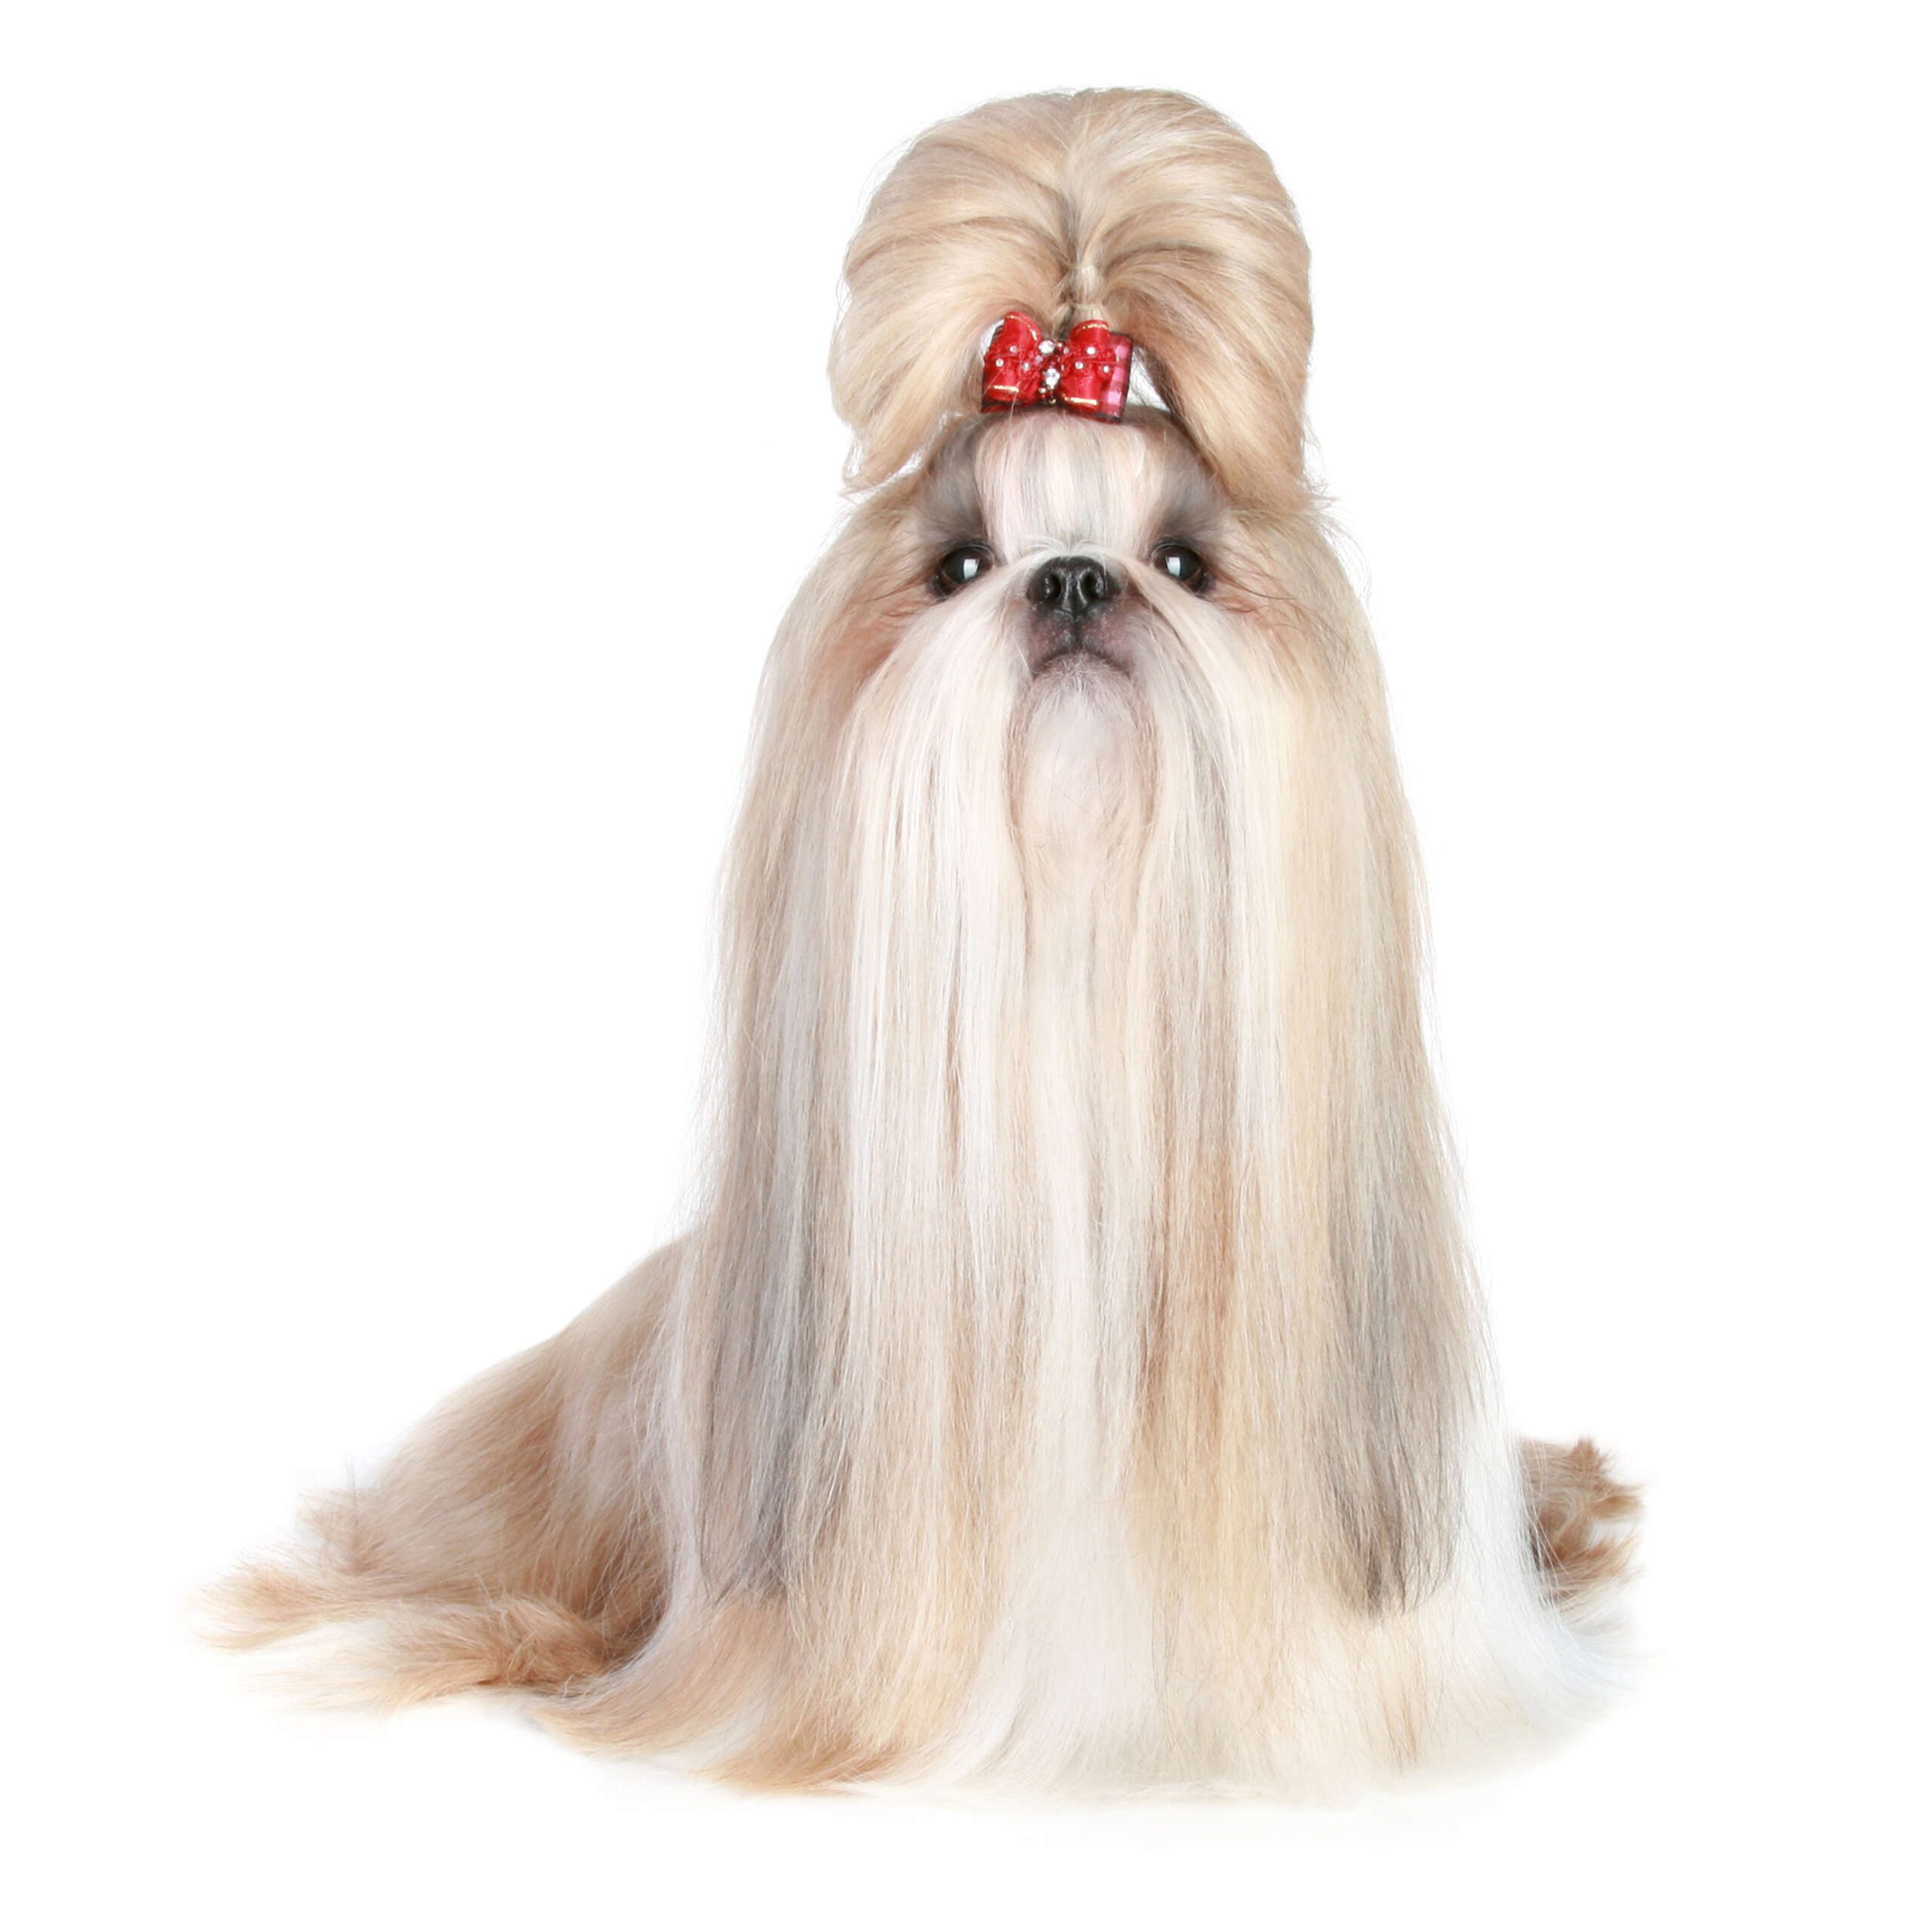 Blond, long-haired Shih Tzu wearing red bow